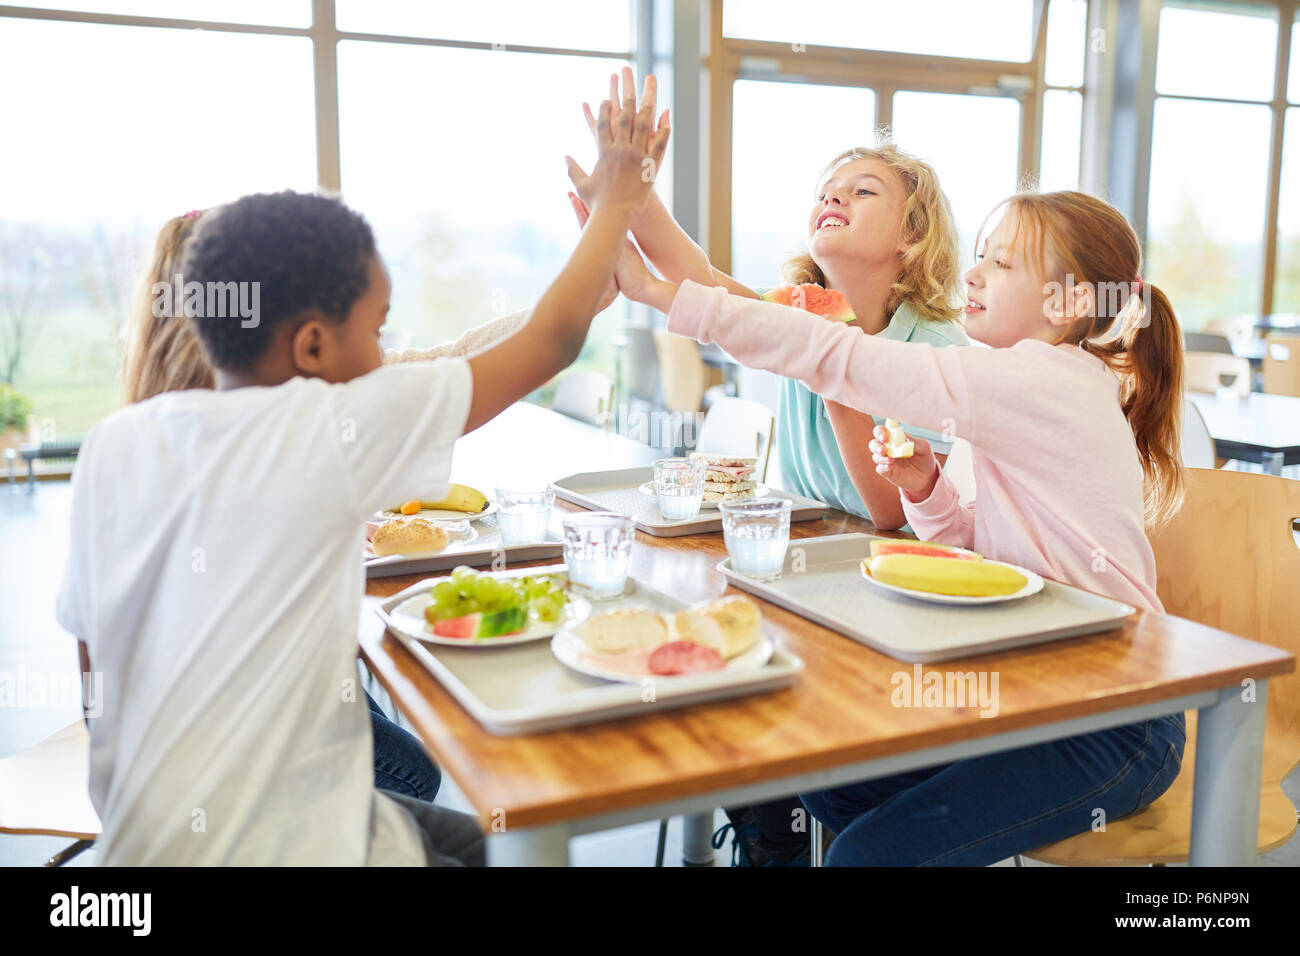 https://c8.alamy.com/comp/P6NP9N/happy-kids-have-fun-together-in-the-canteen-of-the-elementary-school-P6NP9N.jpg